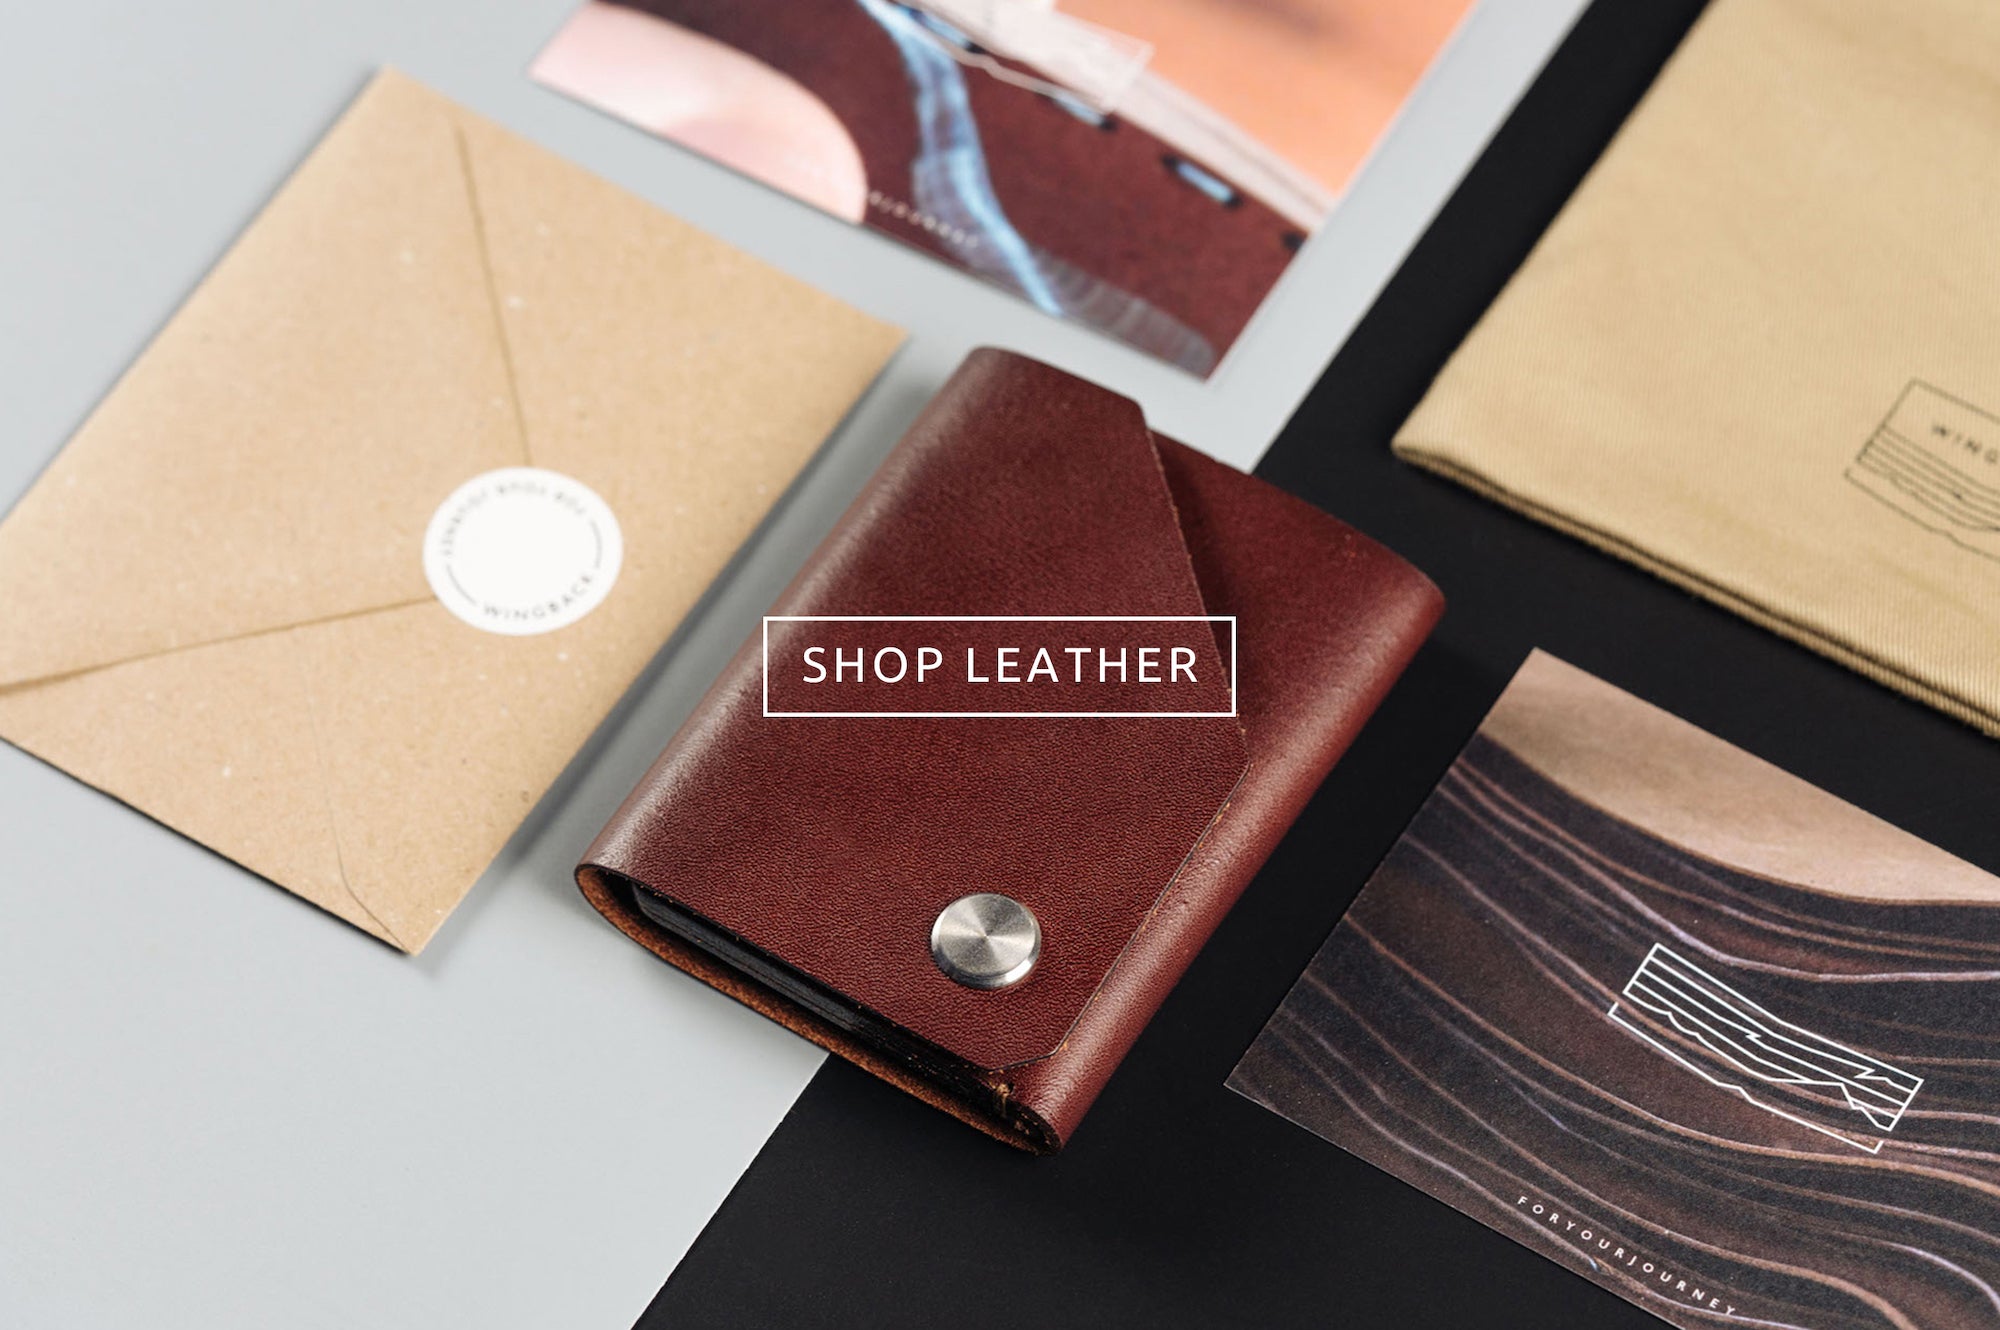 Wingback - shop leather wallets and card holders